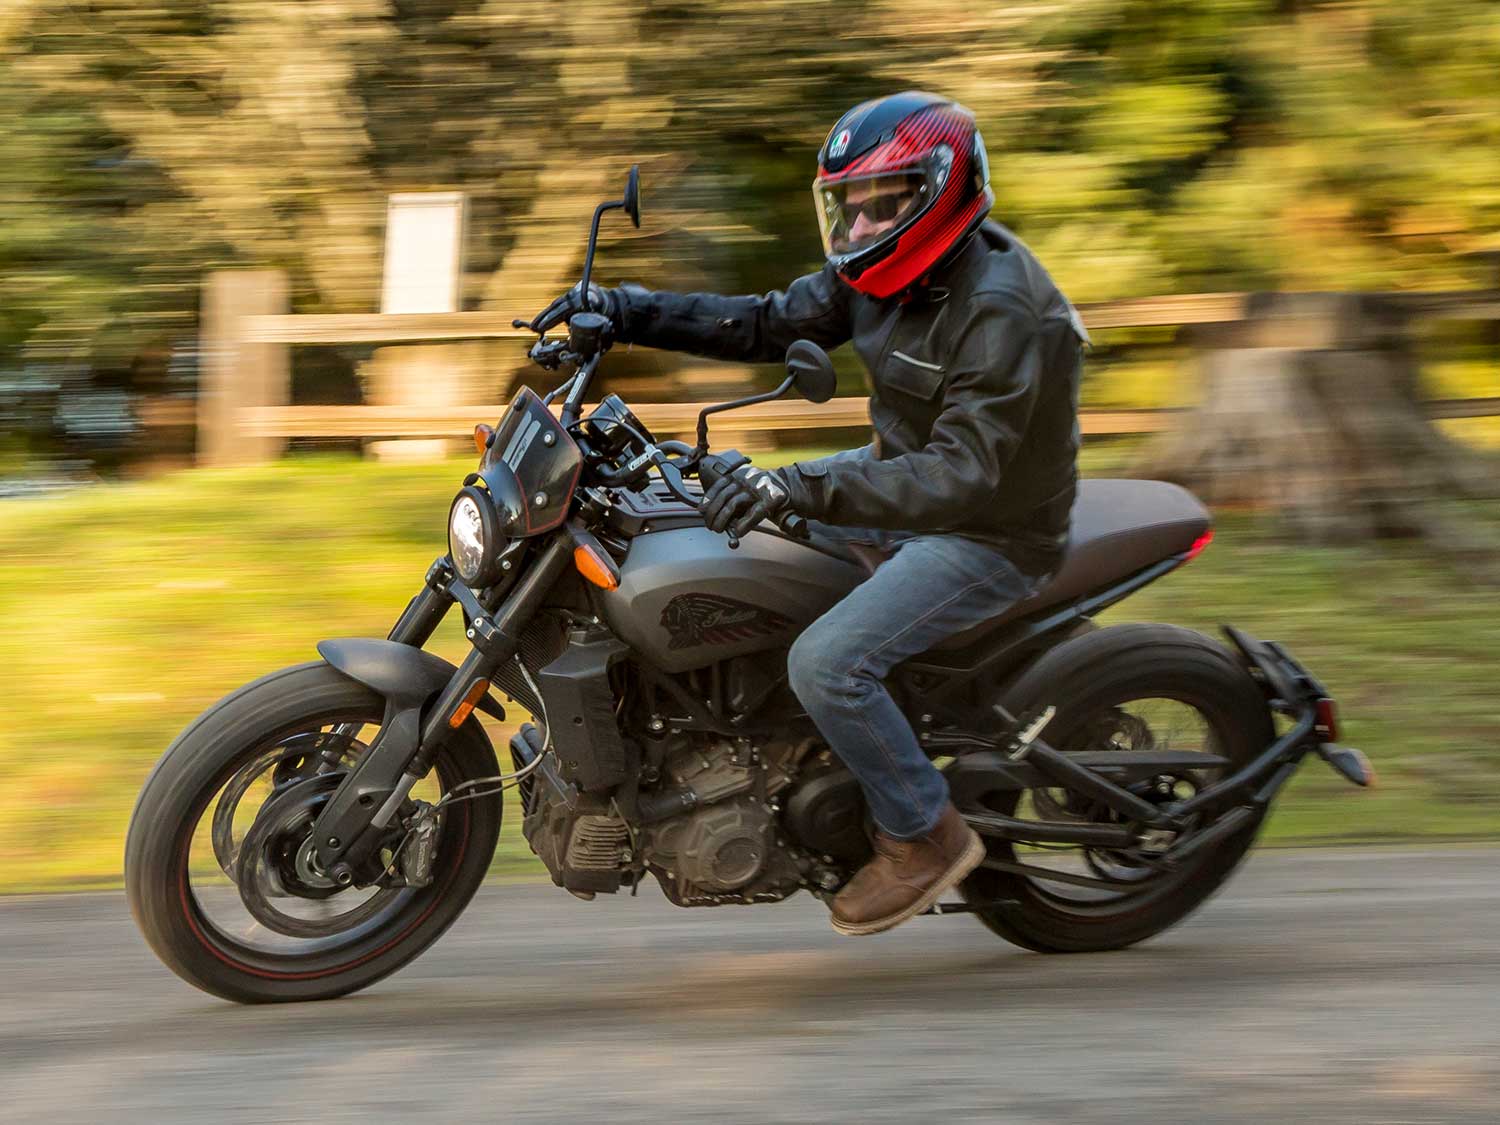 Indian’s newest FTR 1200, the FTR Rally, is coming to America, and we managed to score a quick ride on a preproduction model the day after the announcement.